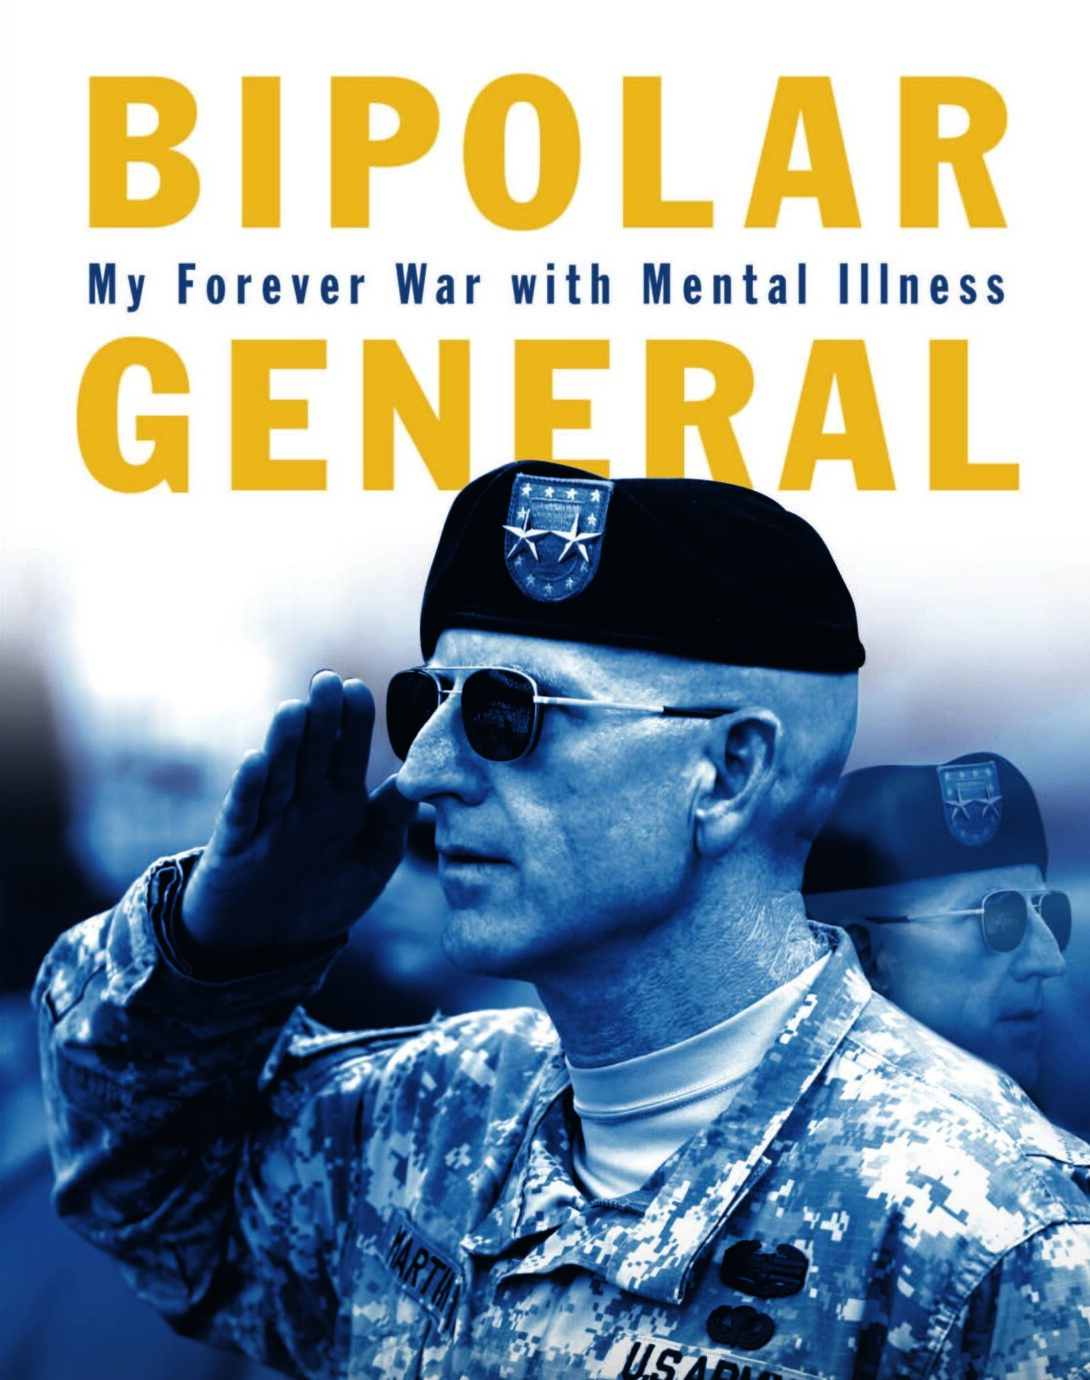 Bipolar General My Forever War with Mental Illness book cover featuring the general in uniform giving a military salute